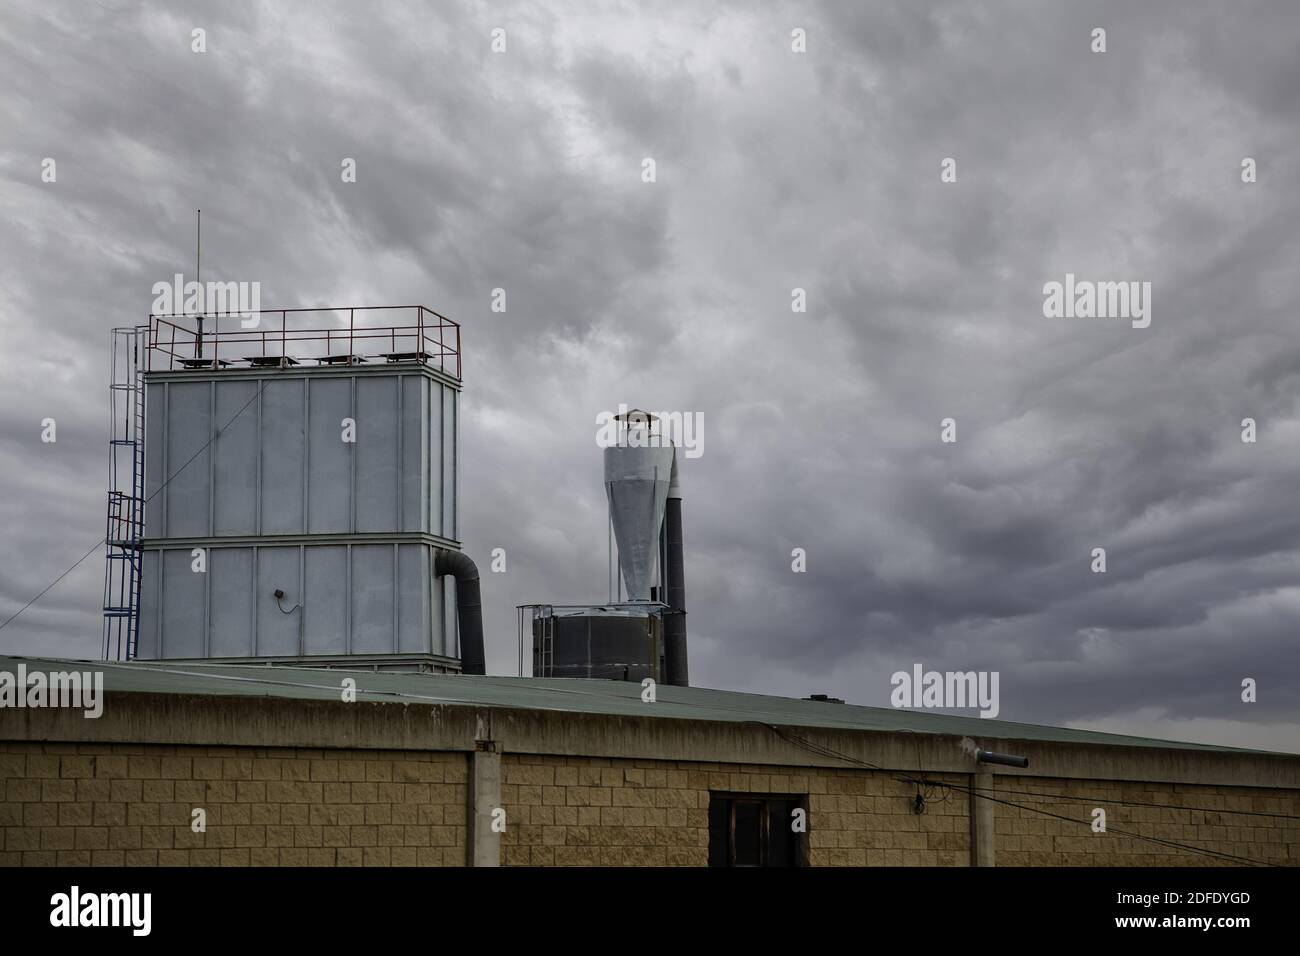 Metal storage tanks, construction and industrial architecture Stock Photo